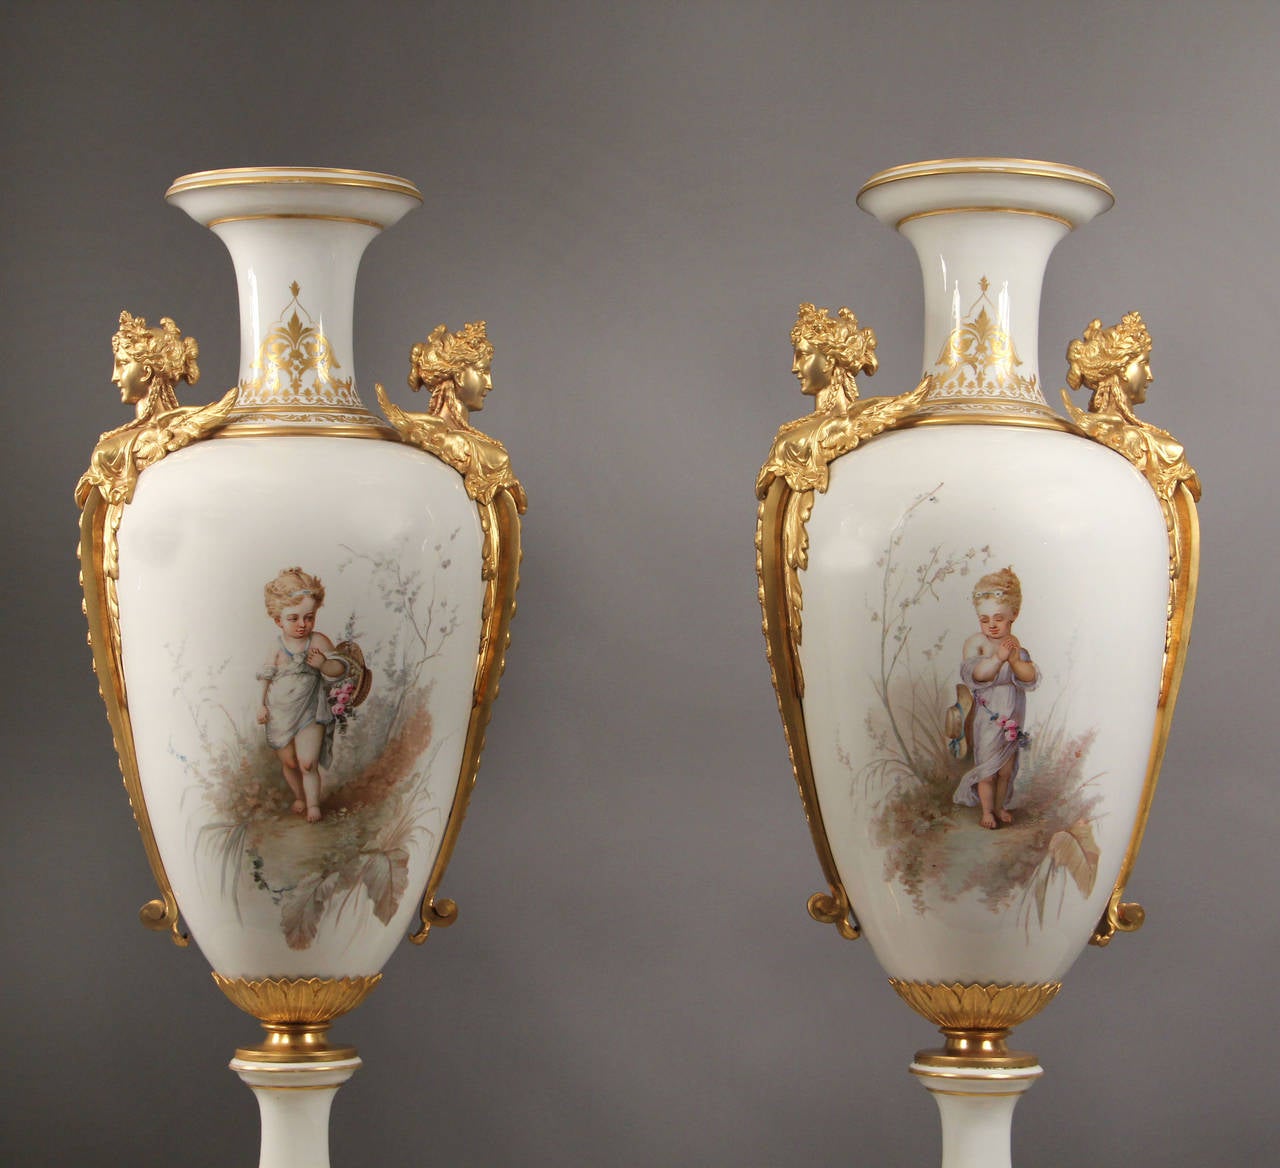 Belle Époque A Rare Pair of Late 19th Century Gilt Bronze Mounted White S�èvres Style Vases